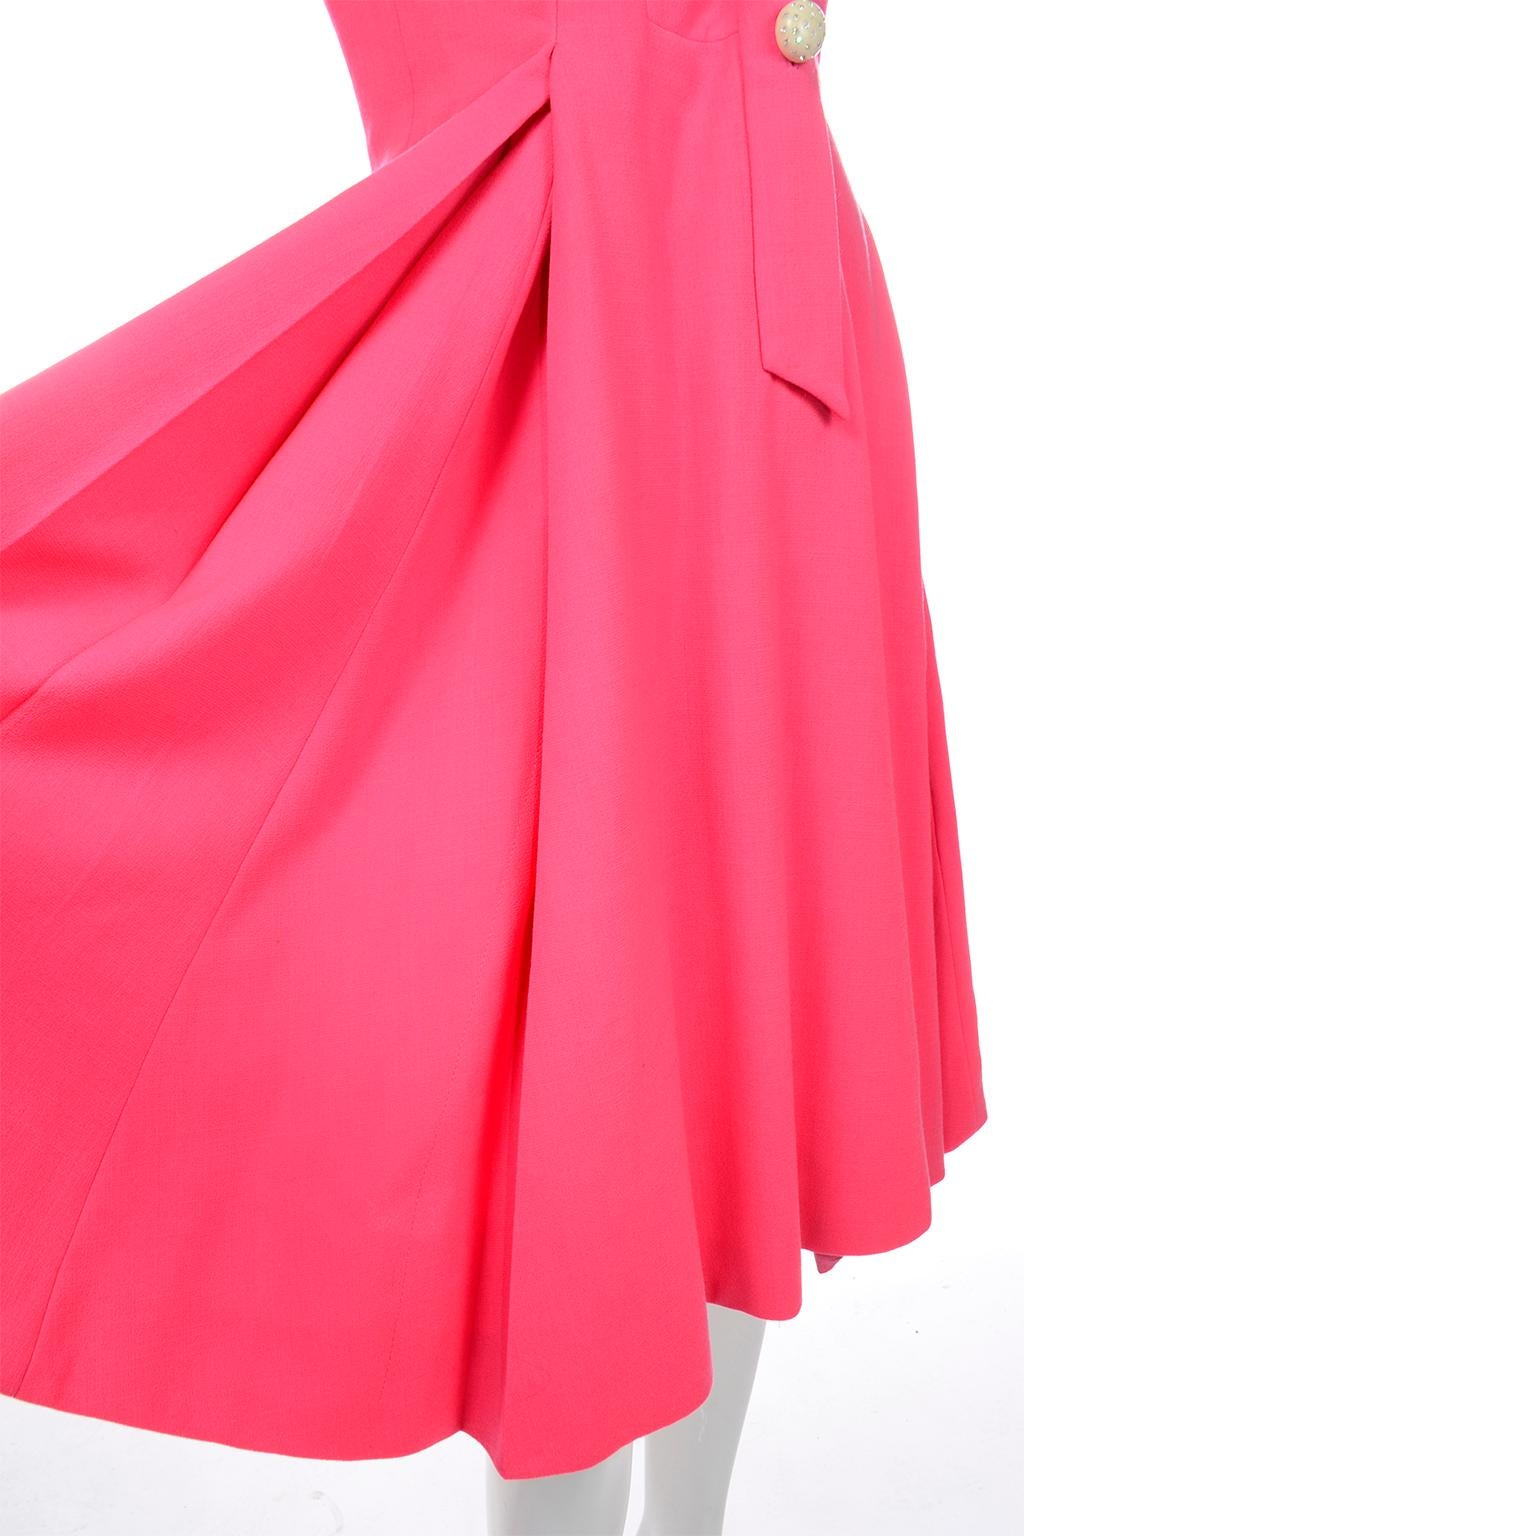 Geoffrey Beene 1960s Bright Vintage Salmon Pink Vintage Dress In Good Condition For Sale In Portland, OR